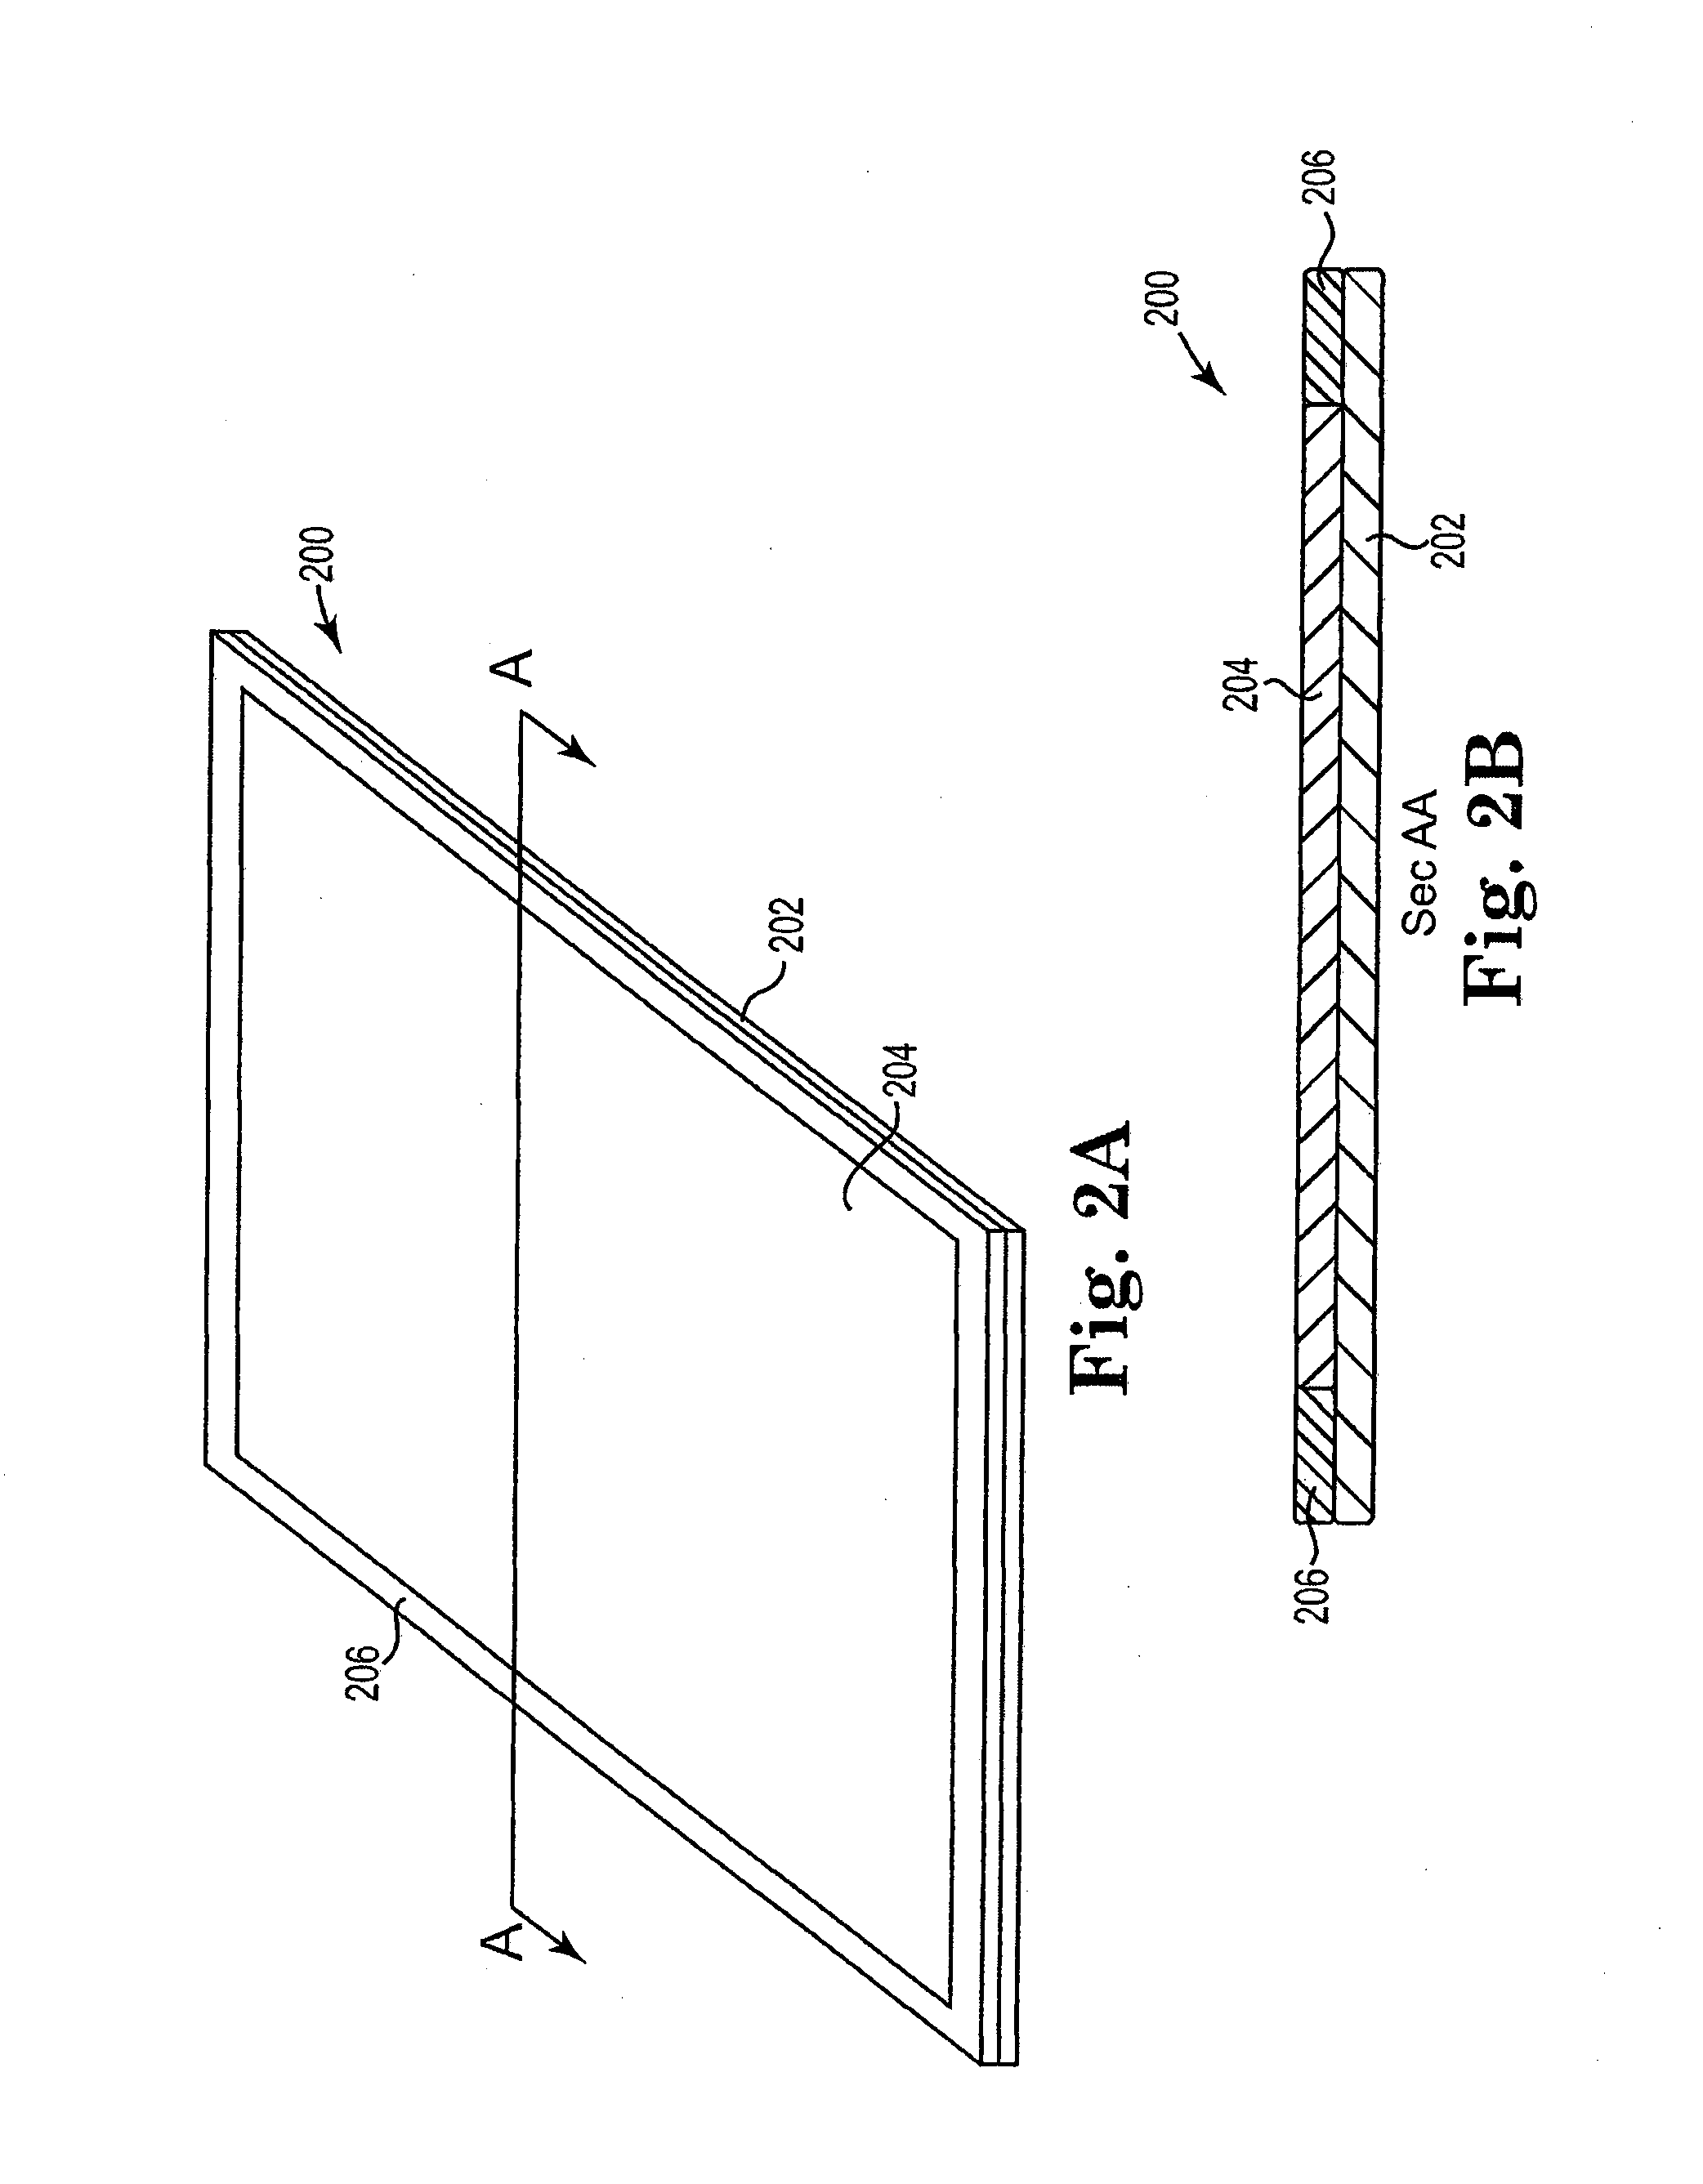 Re-Workable Sealed Hard Disk Drives, Cover Seals Therefor, and Related Methods